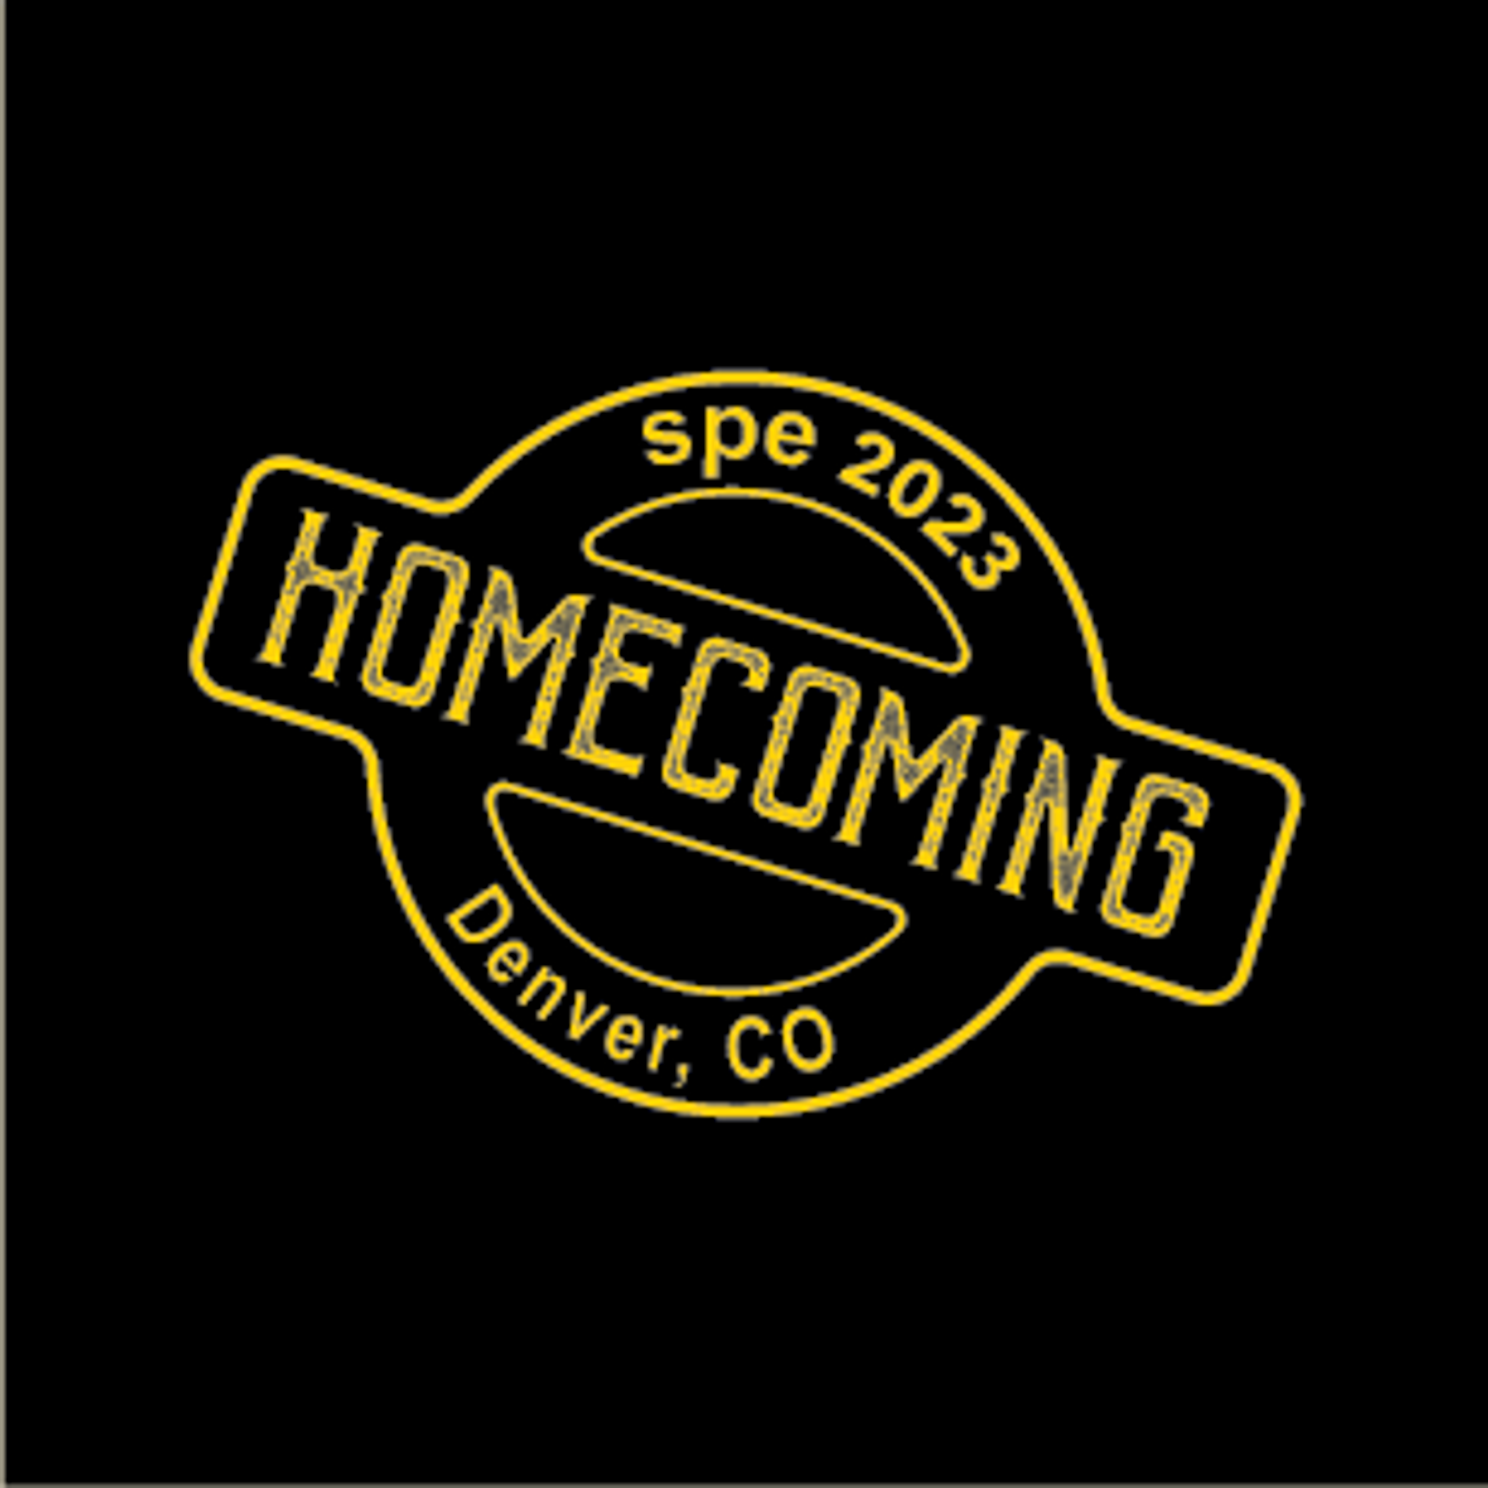 SPE Annual Conference branding Homecoming badge yellow on black